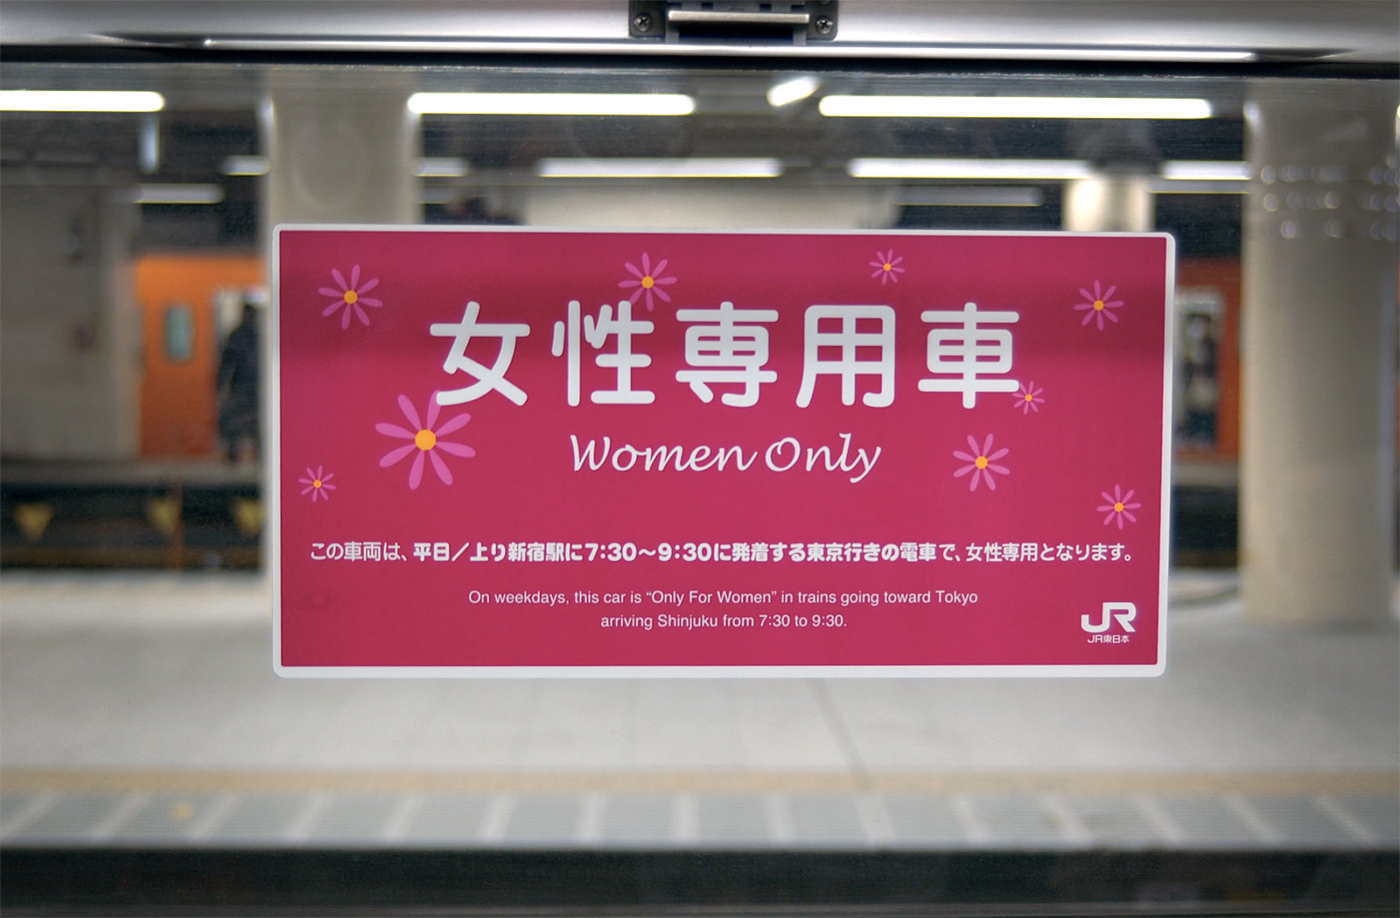 Chikan and Women Only Carriages (Japanese Translation Included)